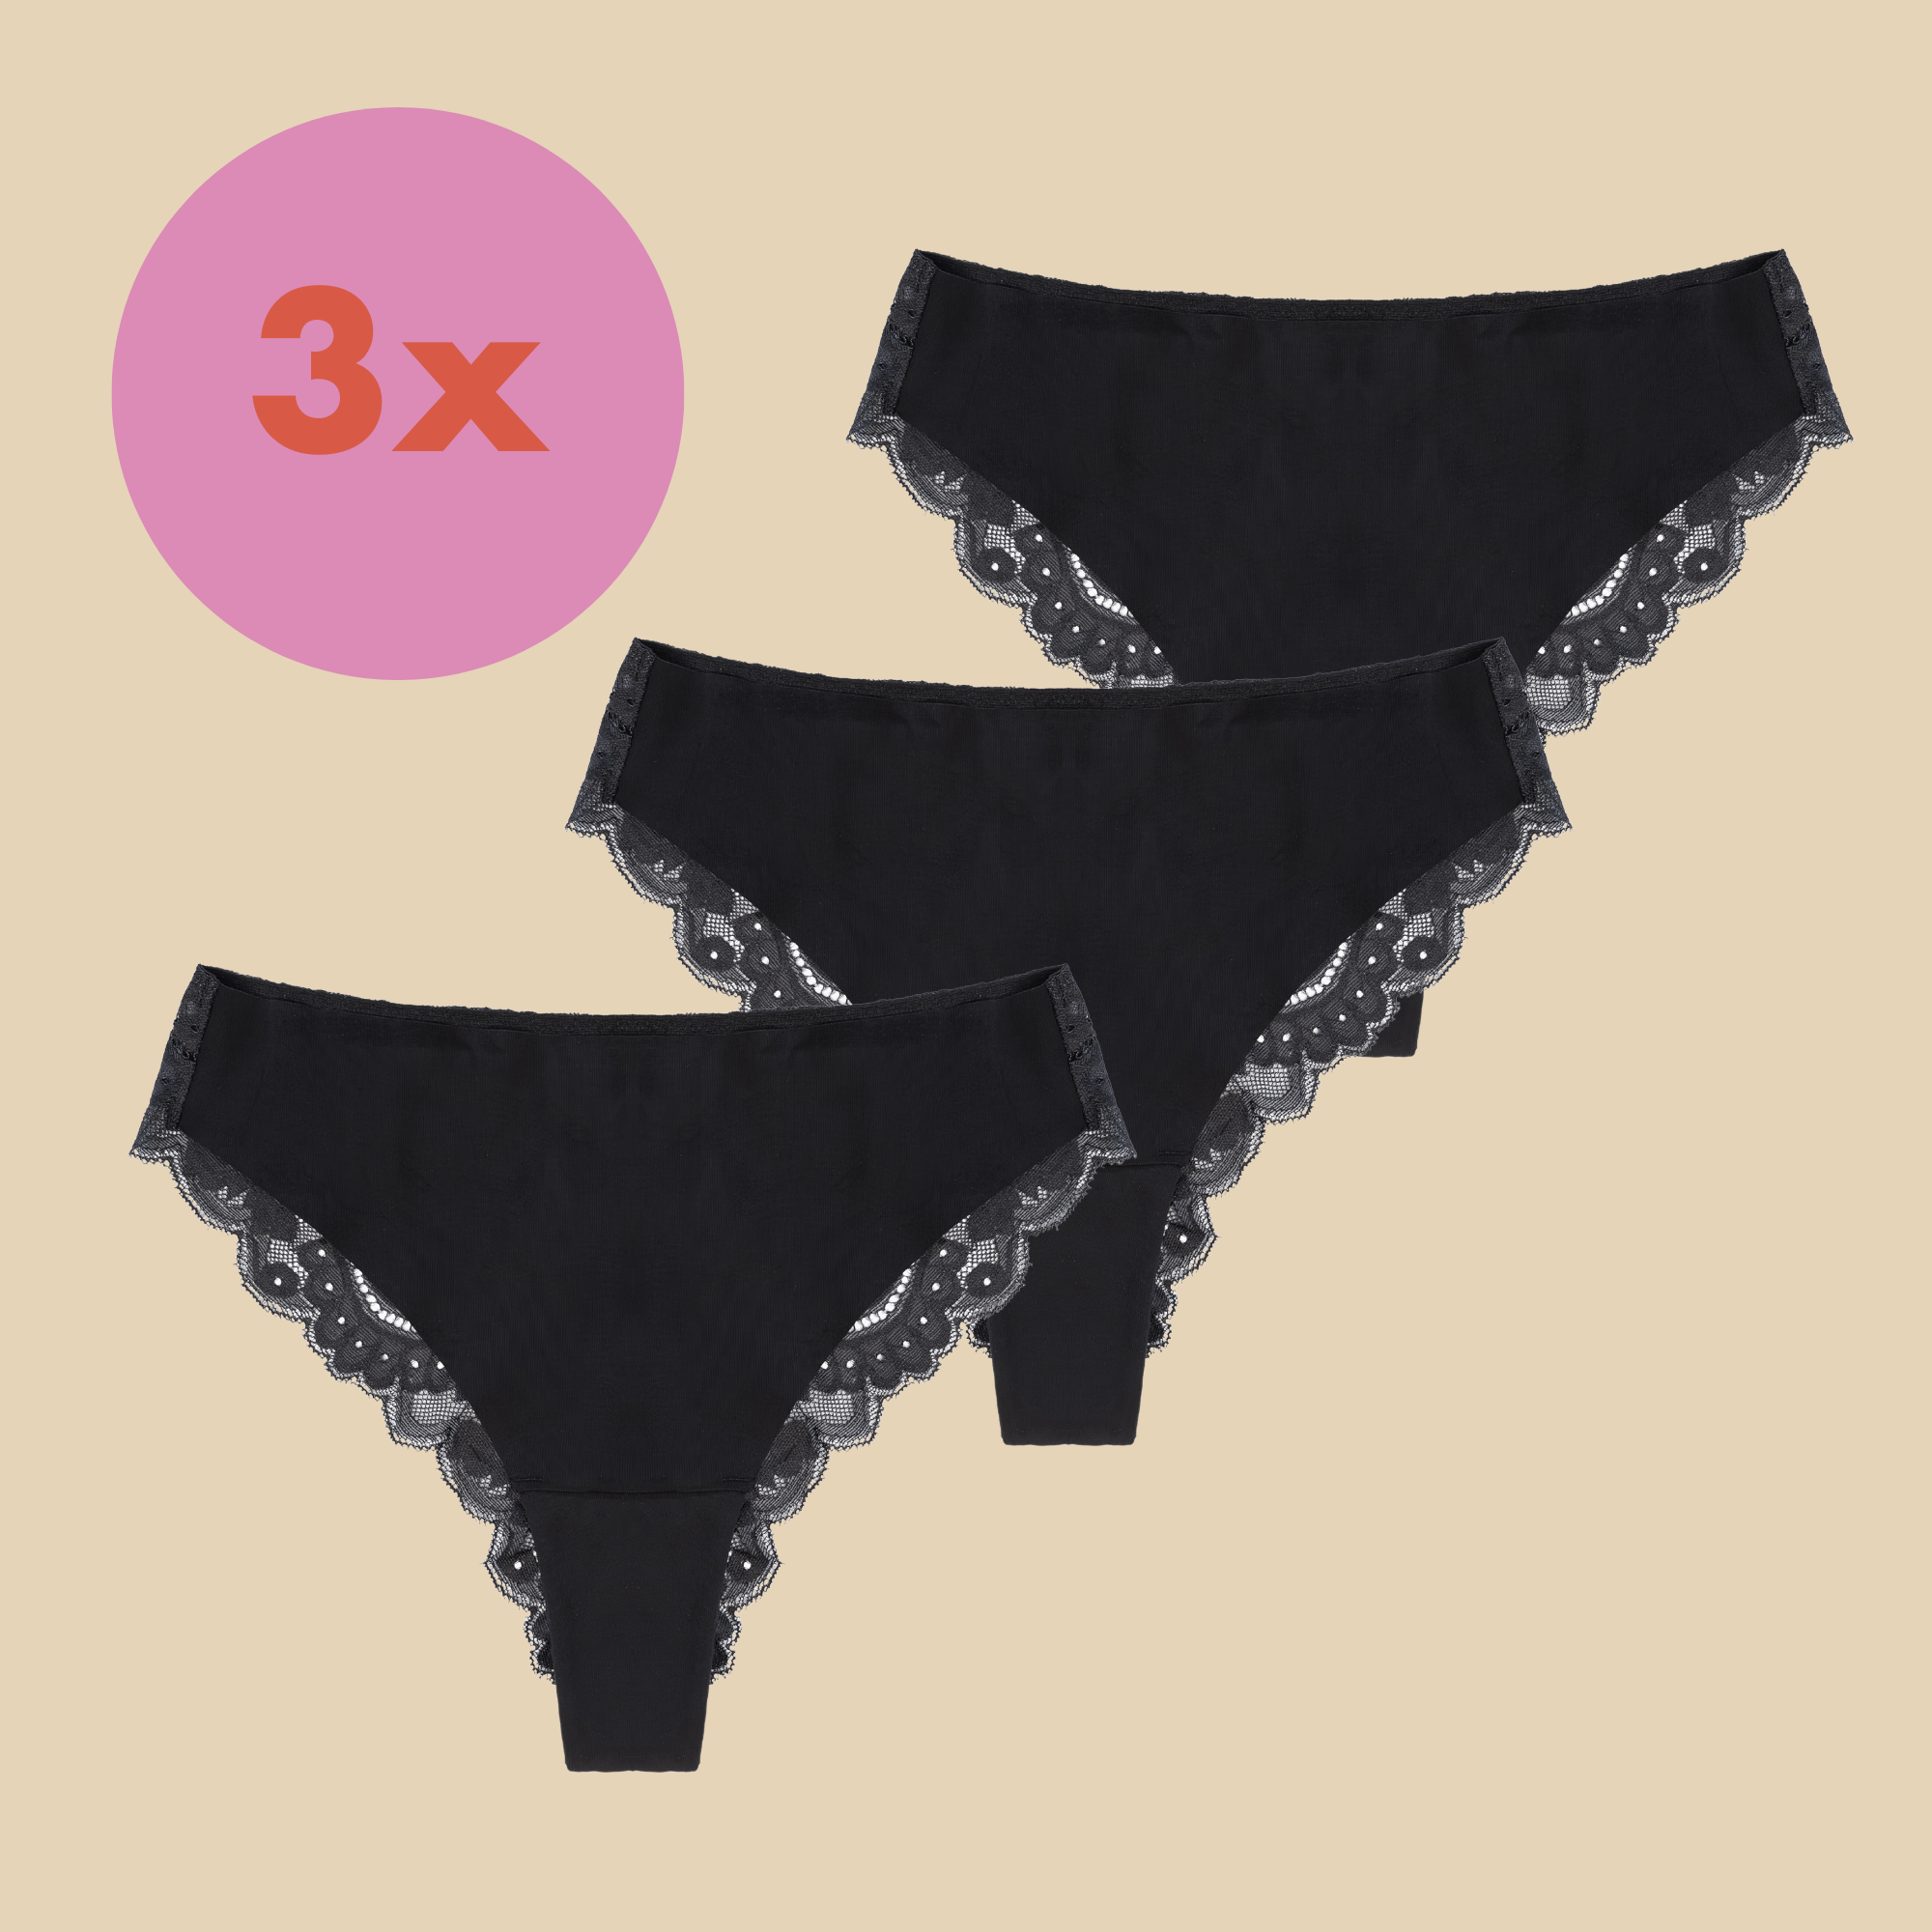 dais daily underwear which is a sustainable alternative to panty liners and tampons. Used for light periods and discharge. In Brazilian cut with lace and black colour. Available in a set of 3 with 10% discount.